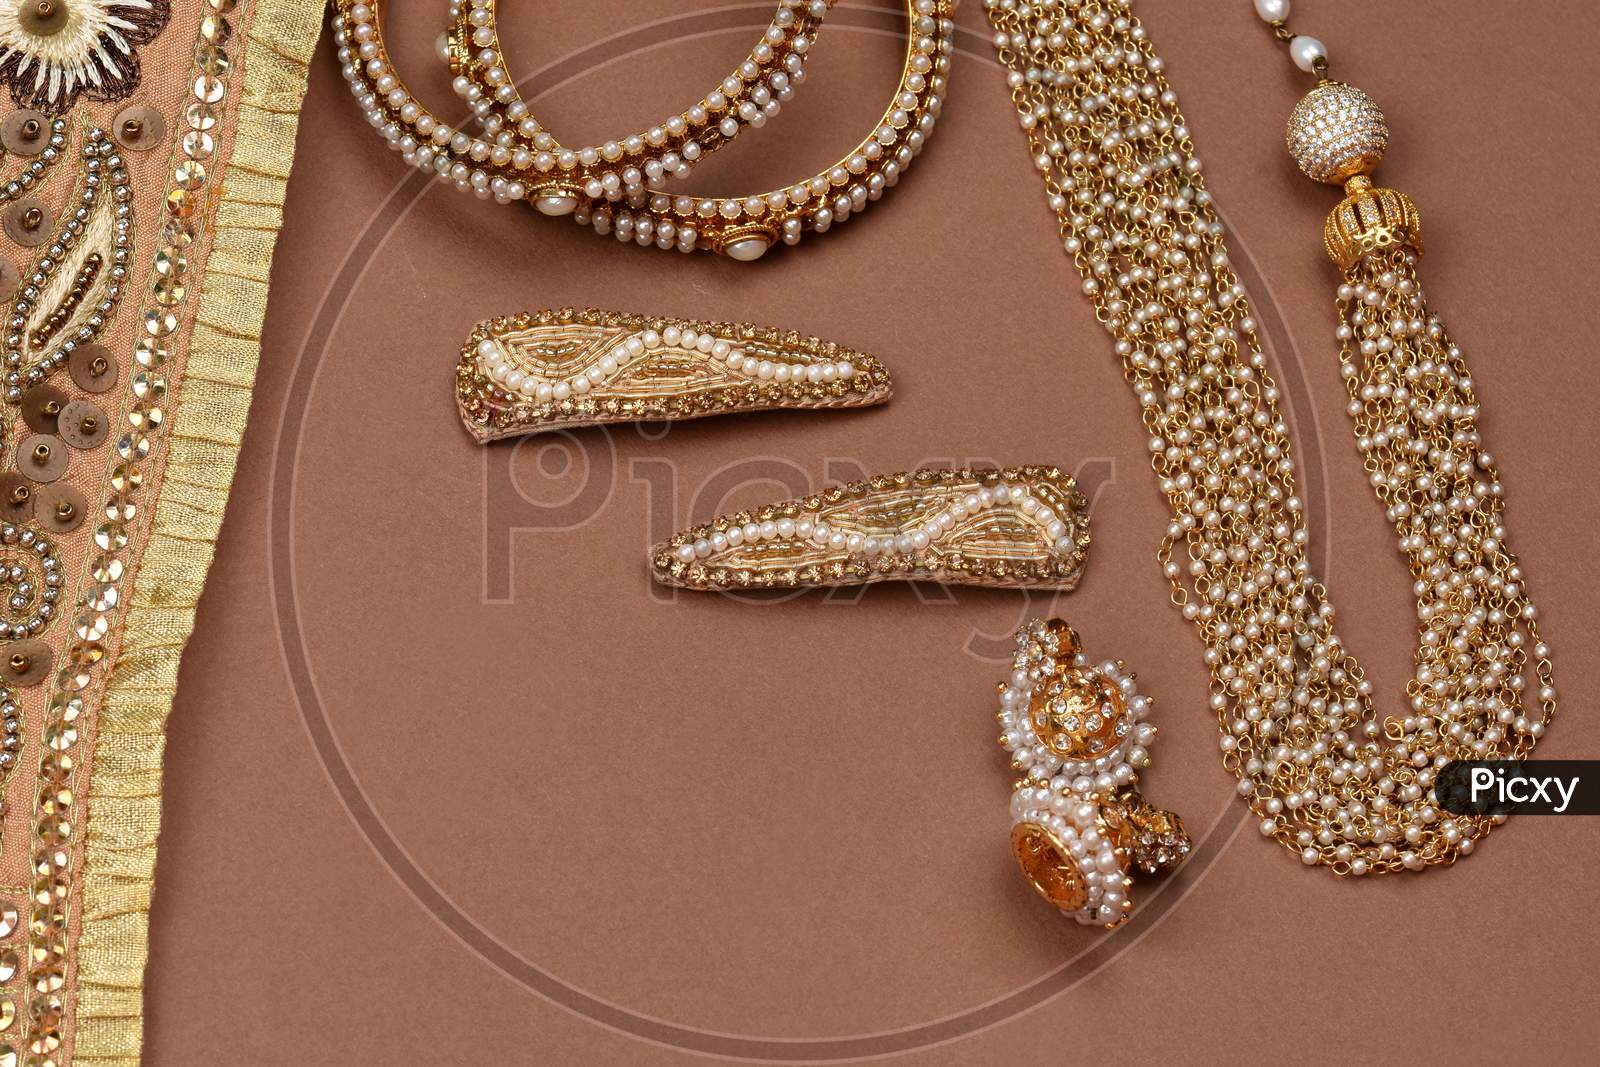 Pearl Jewelry On A Brown Background, Golden Scarf, Pearl Bracelet, Pearl Hair Clip, Pearl Necklace, Pearl Earringsjewelry Background.Style, Fashion And Design Of Jewelry. Indian Traditional Jewellery